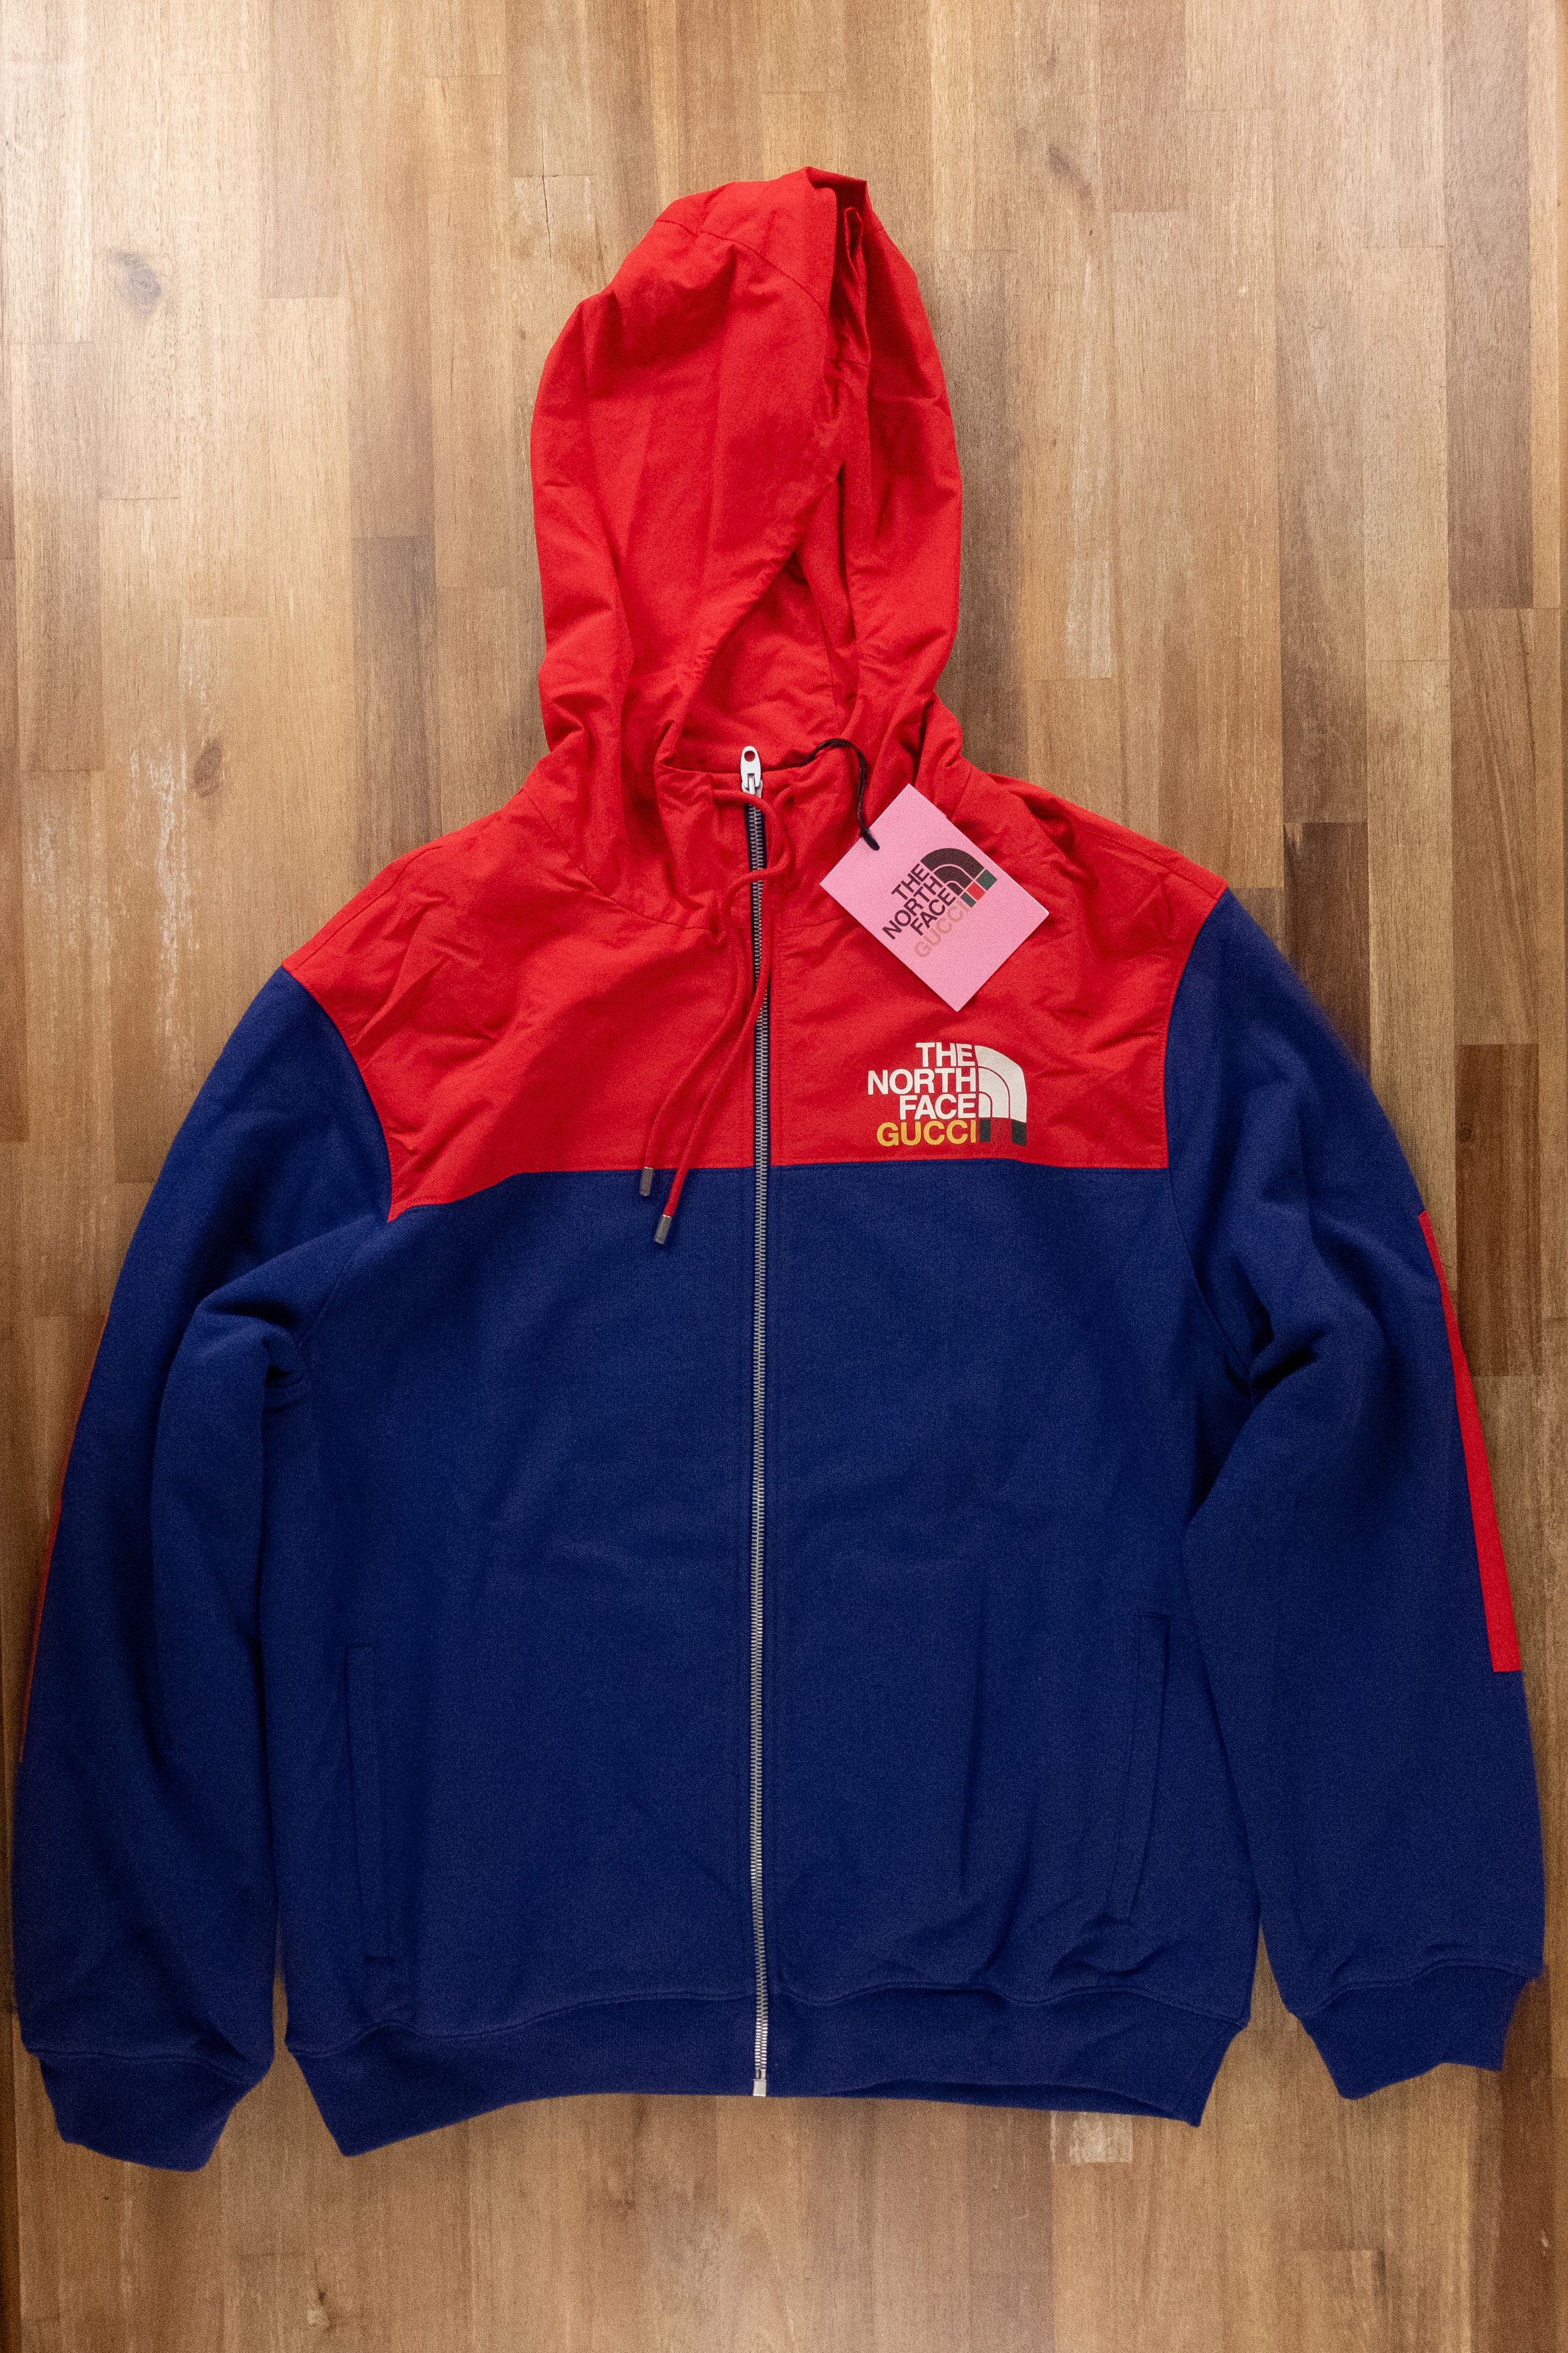 The North Face x Gucci Men's Authenticated Jacket